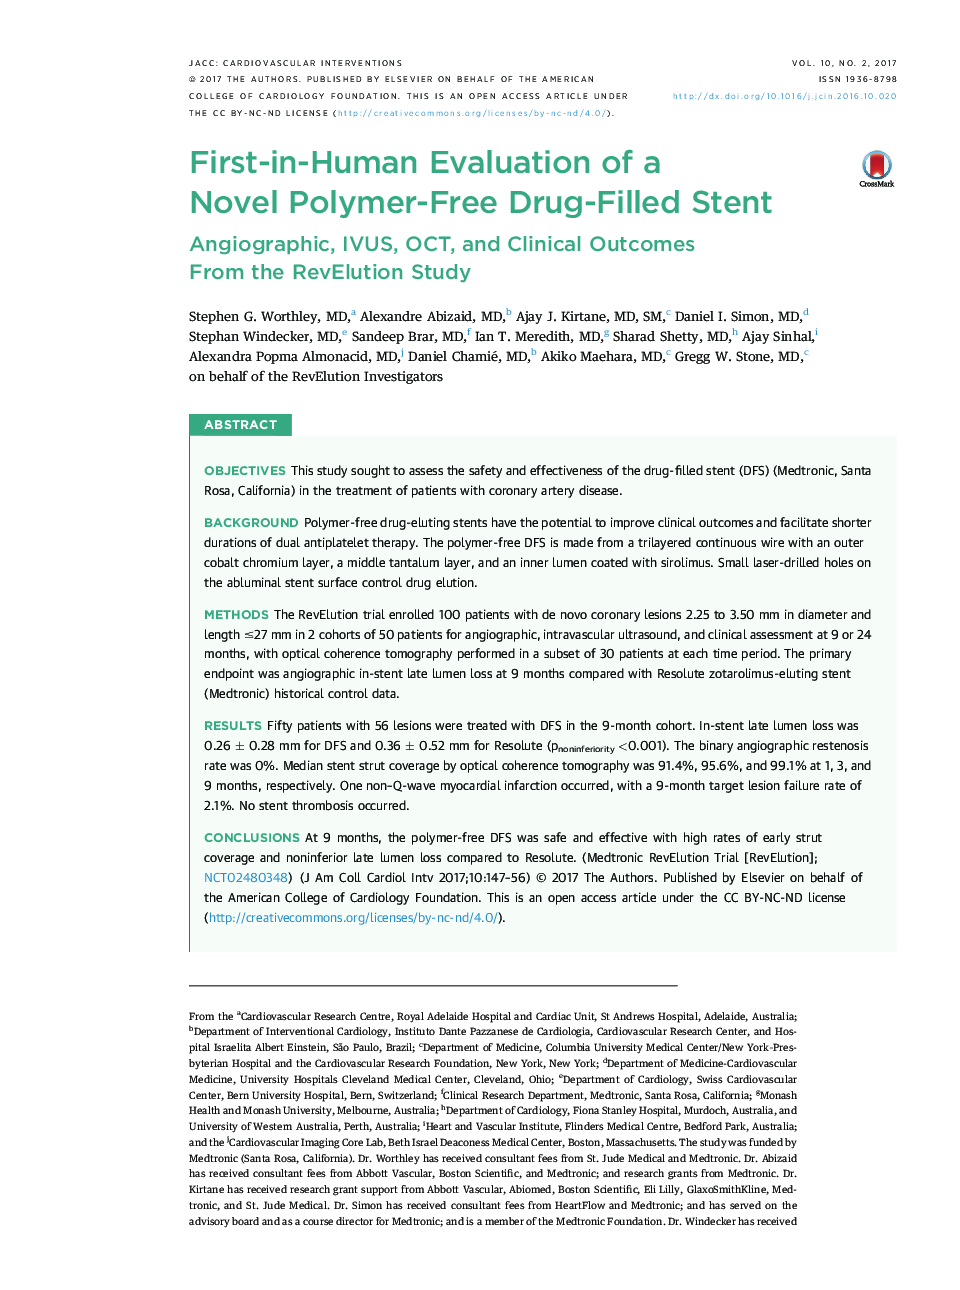 First-in-Human Evaluation of a NovelÂ Polymer-Free Drug-Filled Stent